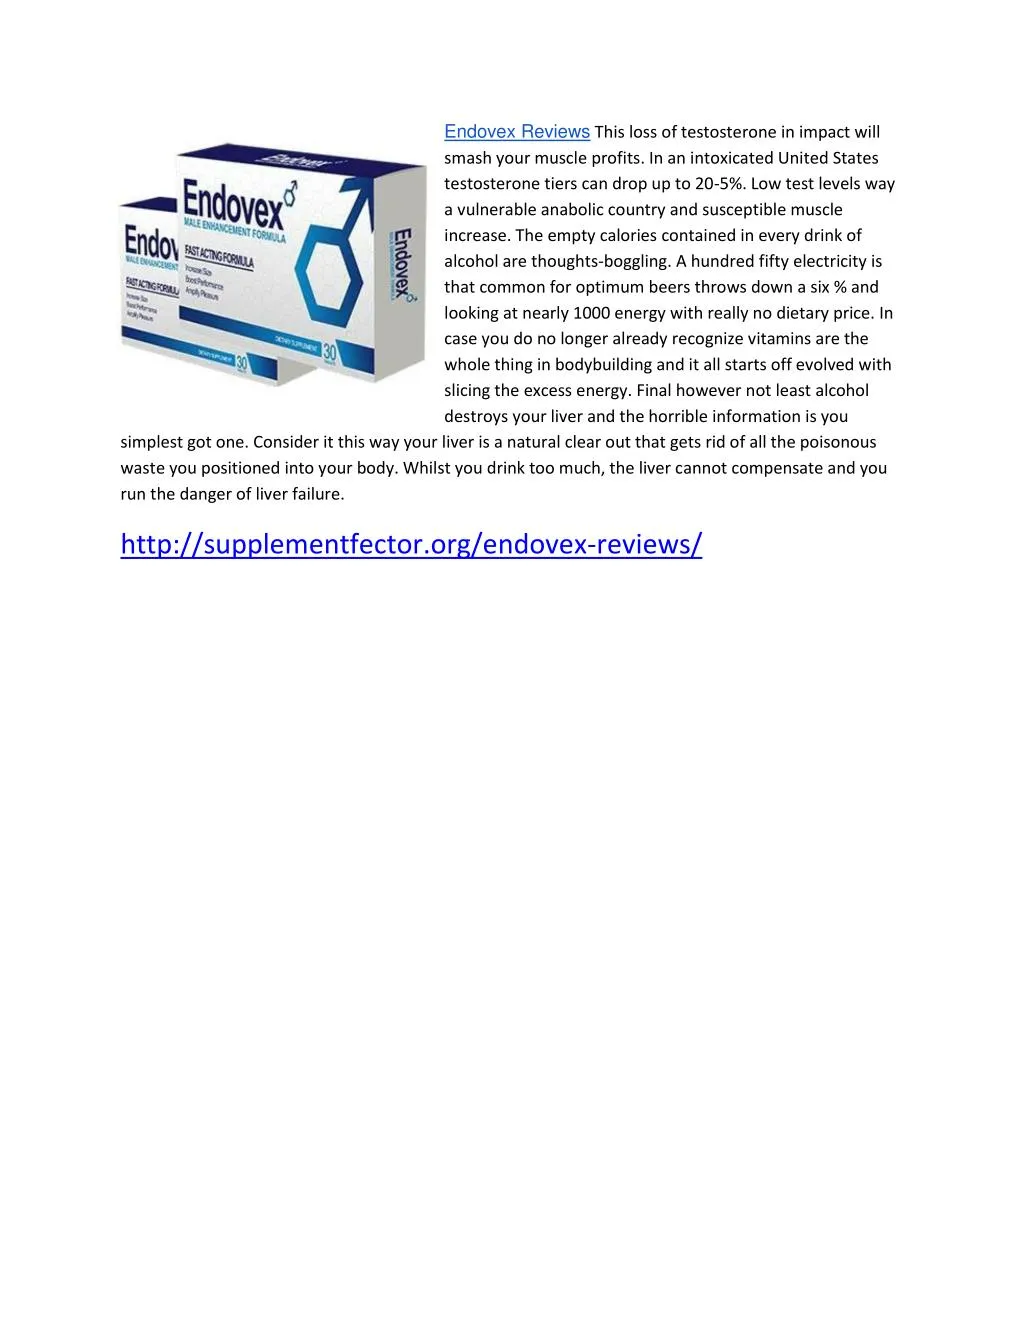 endovex reviews this loss of testosterone